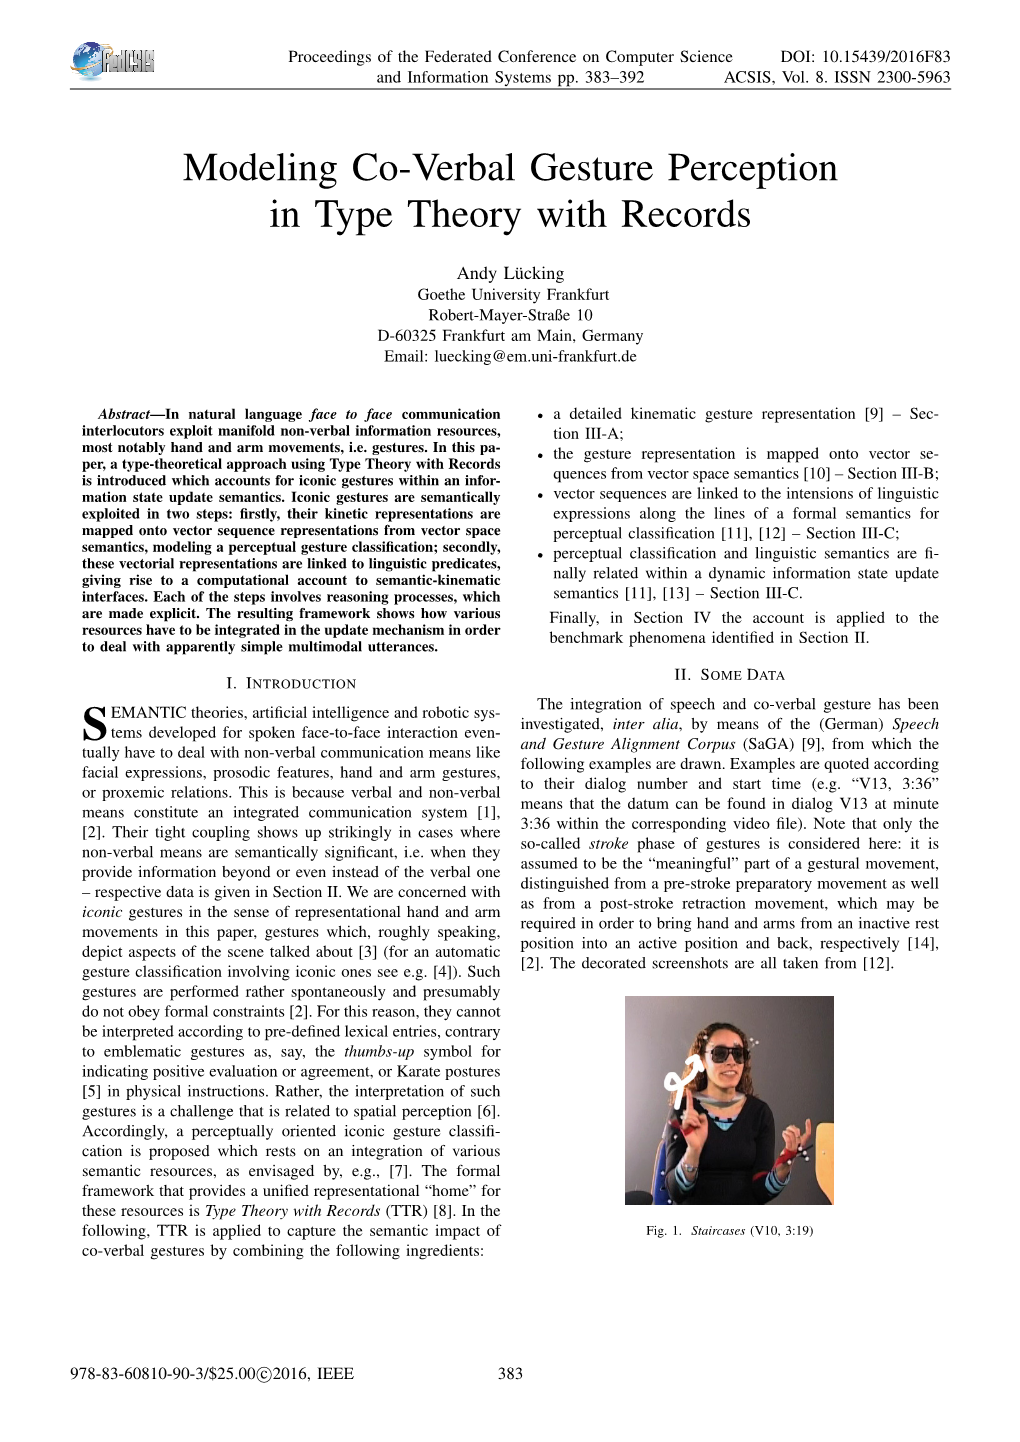 Modeling Co-Verbal Gesture Perception in Type Theory with Records